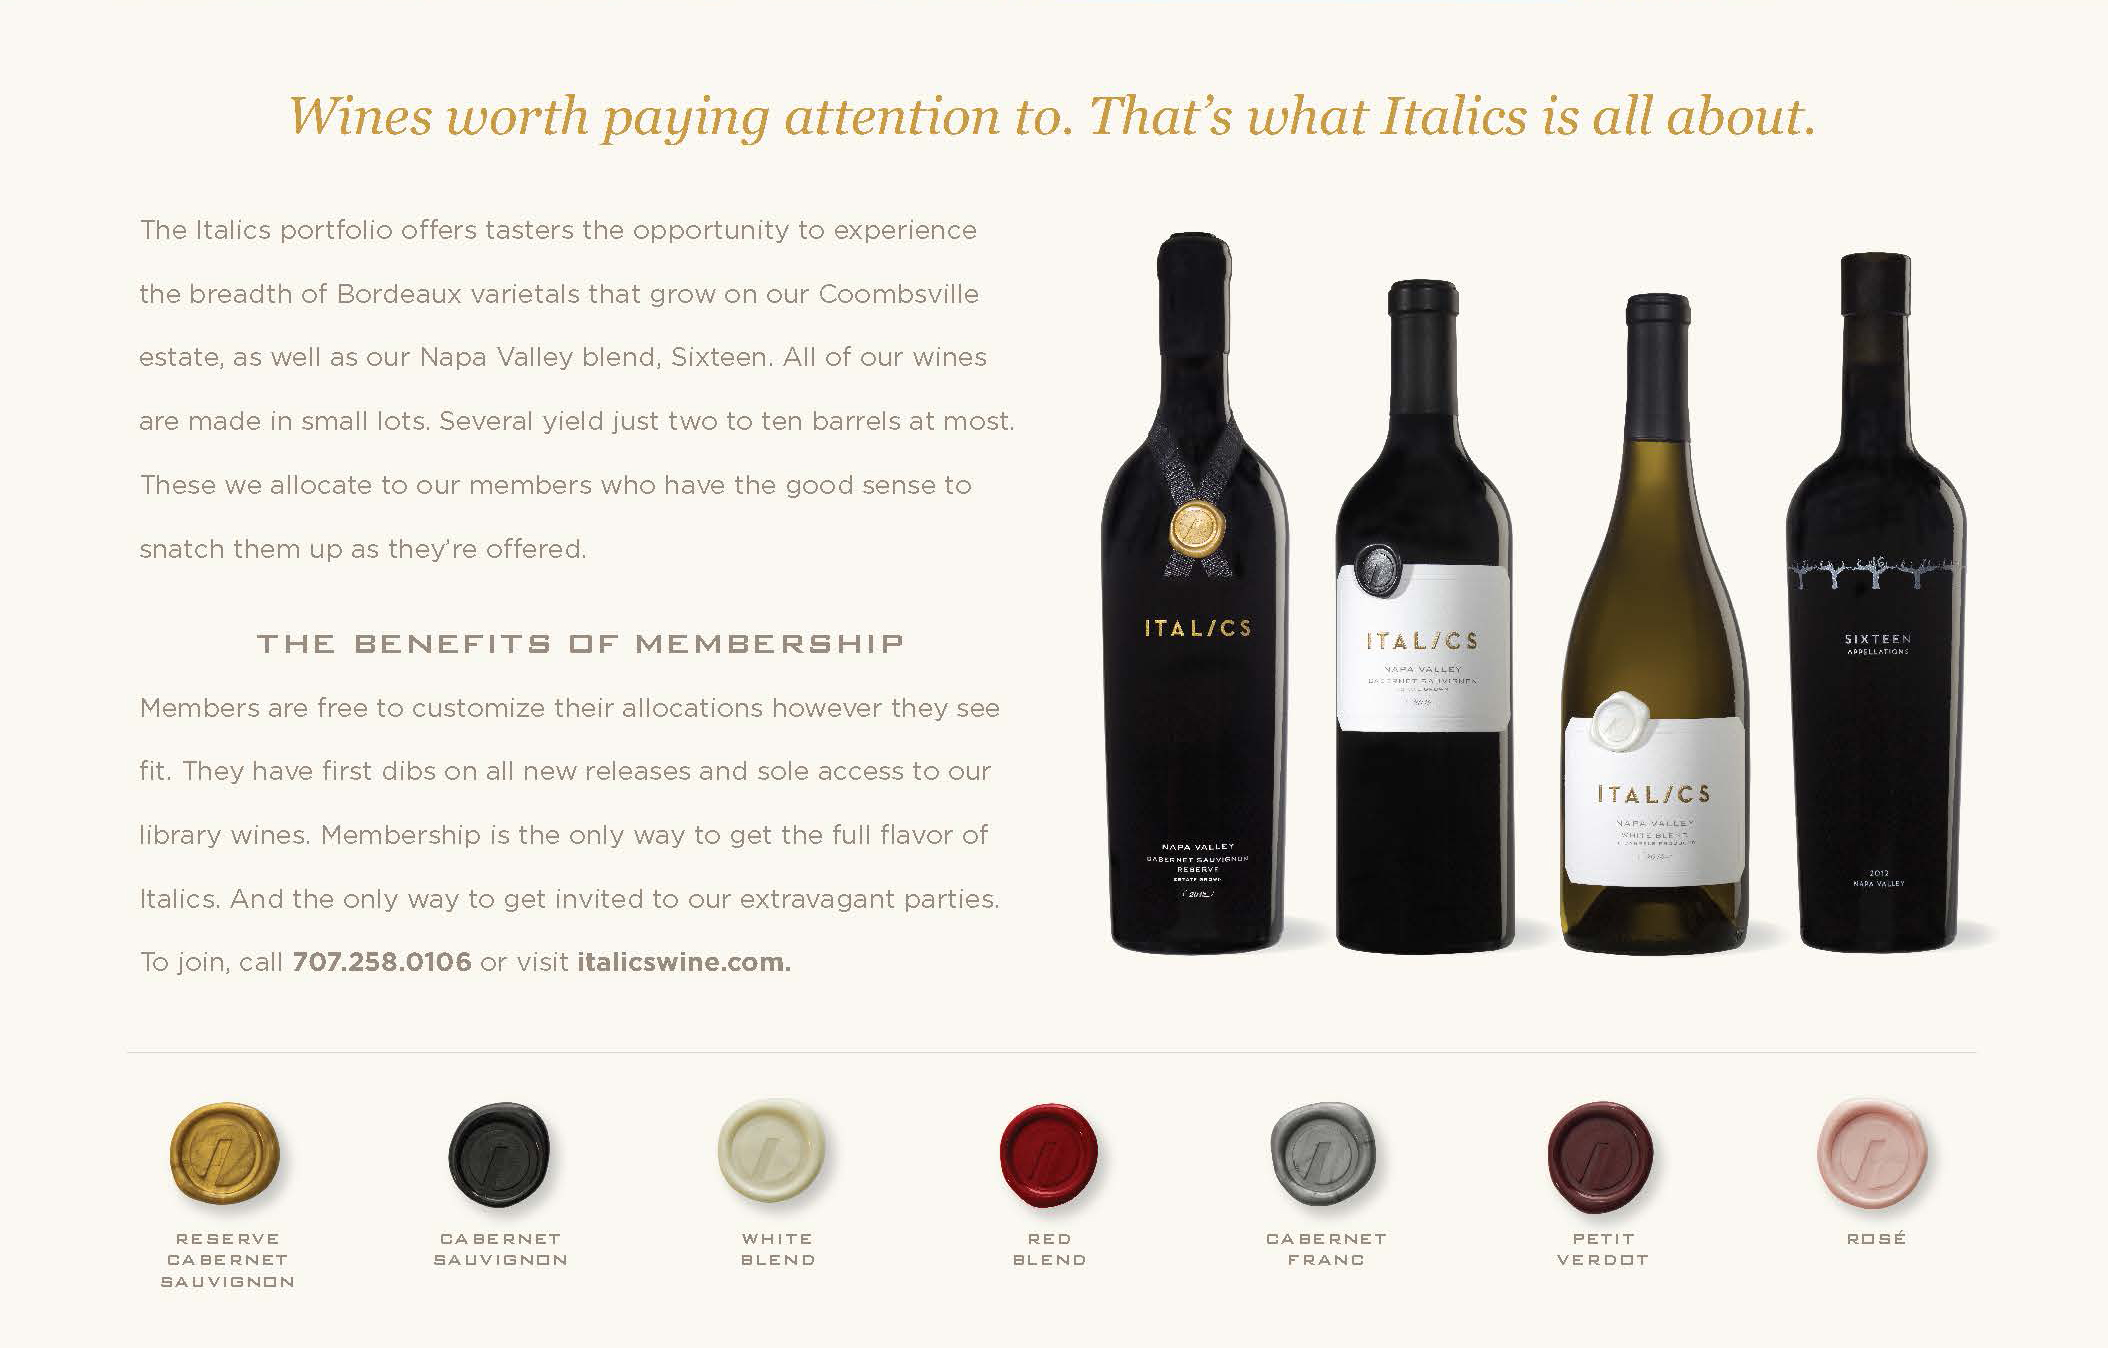 On the back, a peek at the packaging, icons for all the varietals produced, and a pitch to join the wine club.